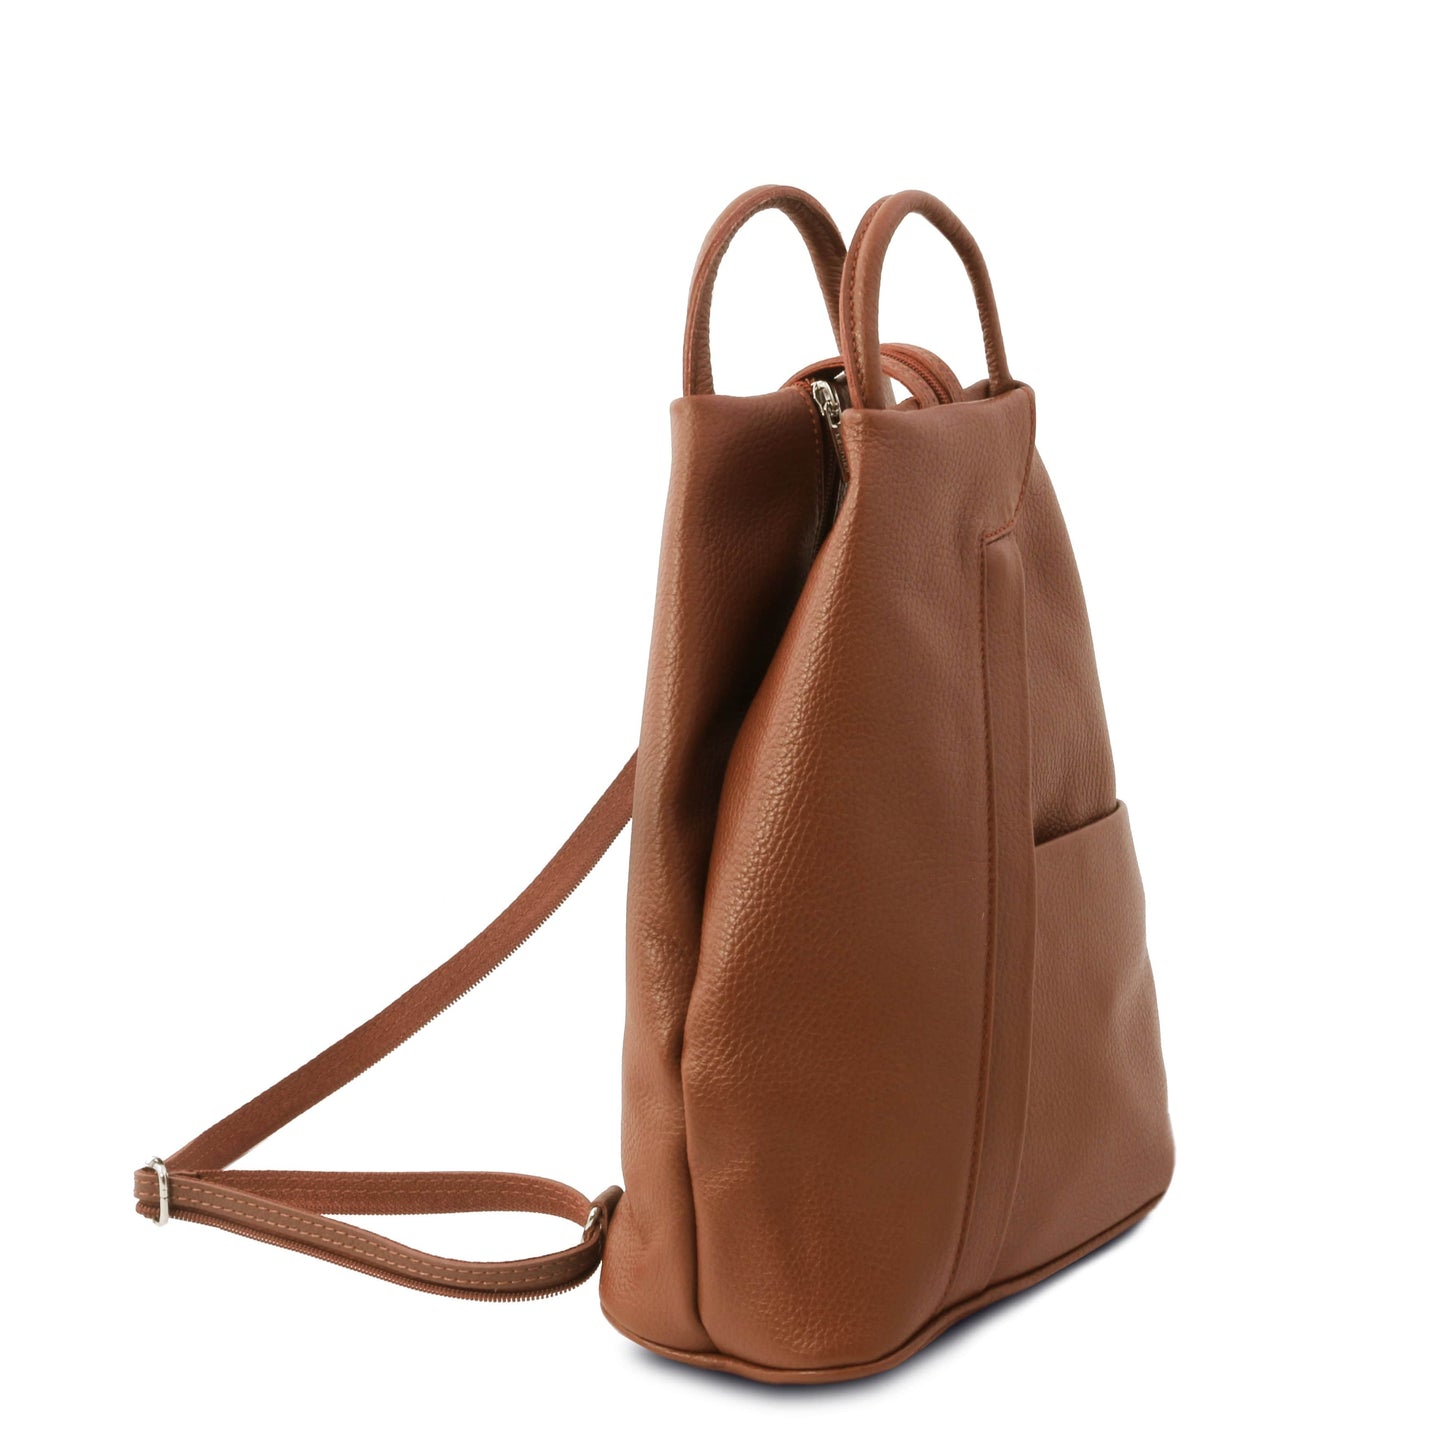 Shanghai - Italian leather backpack | TL141881 - Premium Leather Backpacks - Shop now at San Rocco Italia